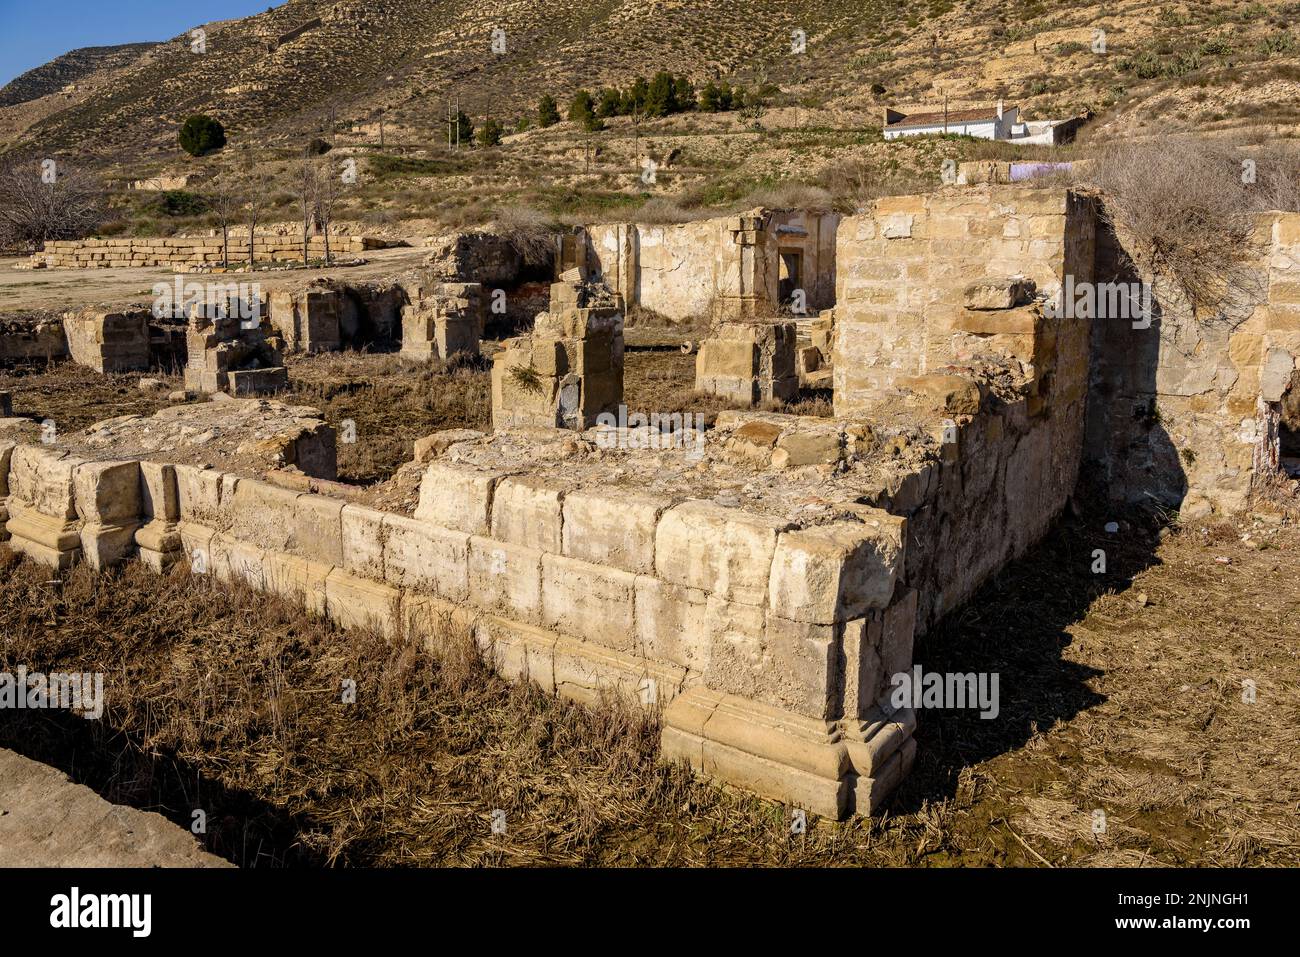 Remains of the old church of Mequinenza destroyed after the construction of the Ribarroja reservoir (Bajo Cinca, Zaragoza, Aragon, Spain) Stock Photo